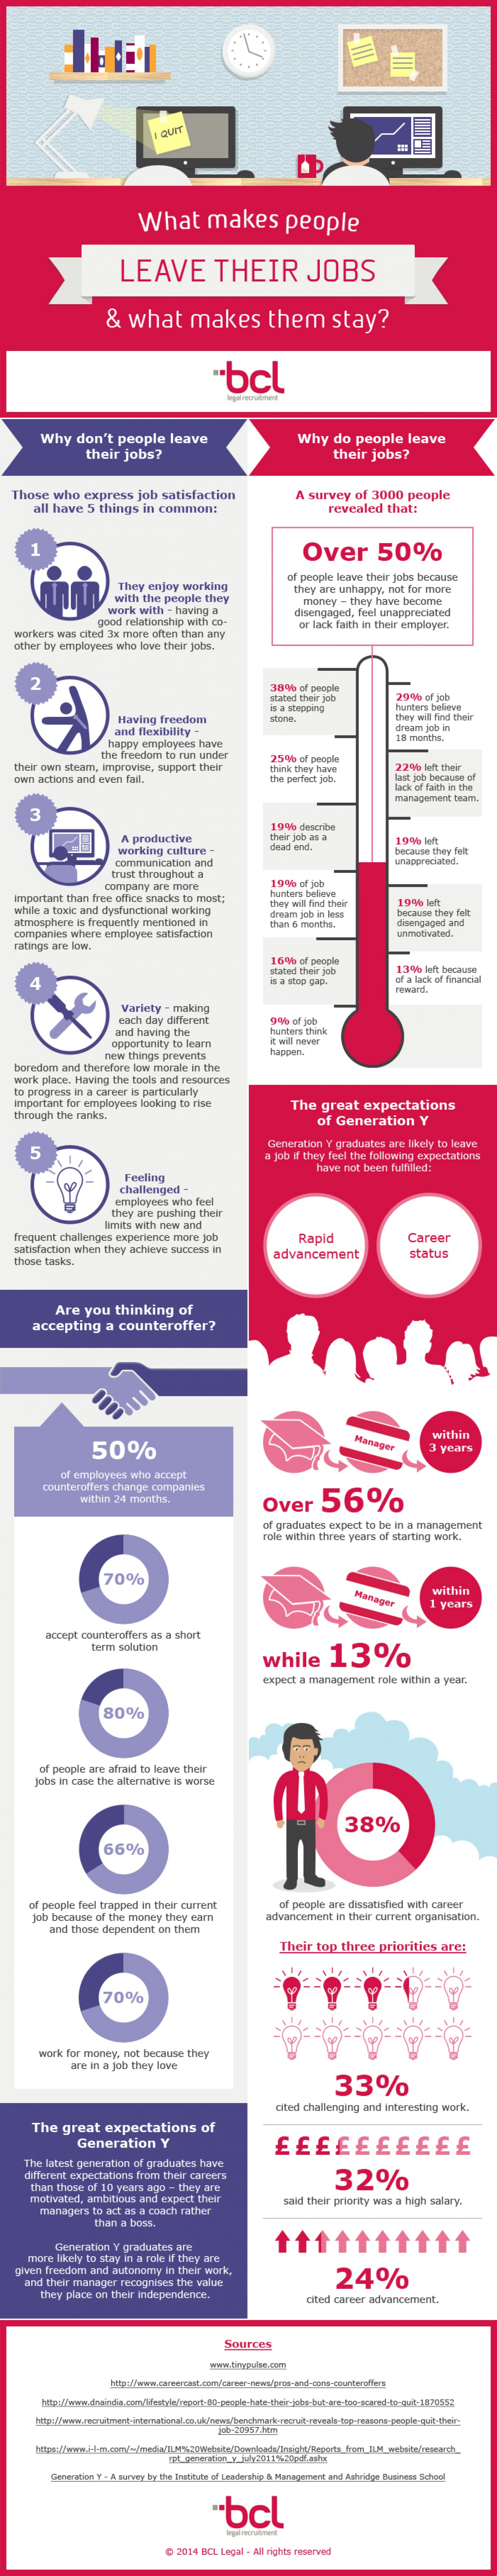 What Makes People Stay At Their Job or Quit? [INFOGRAPHIC]